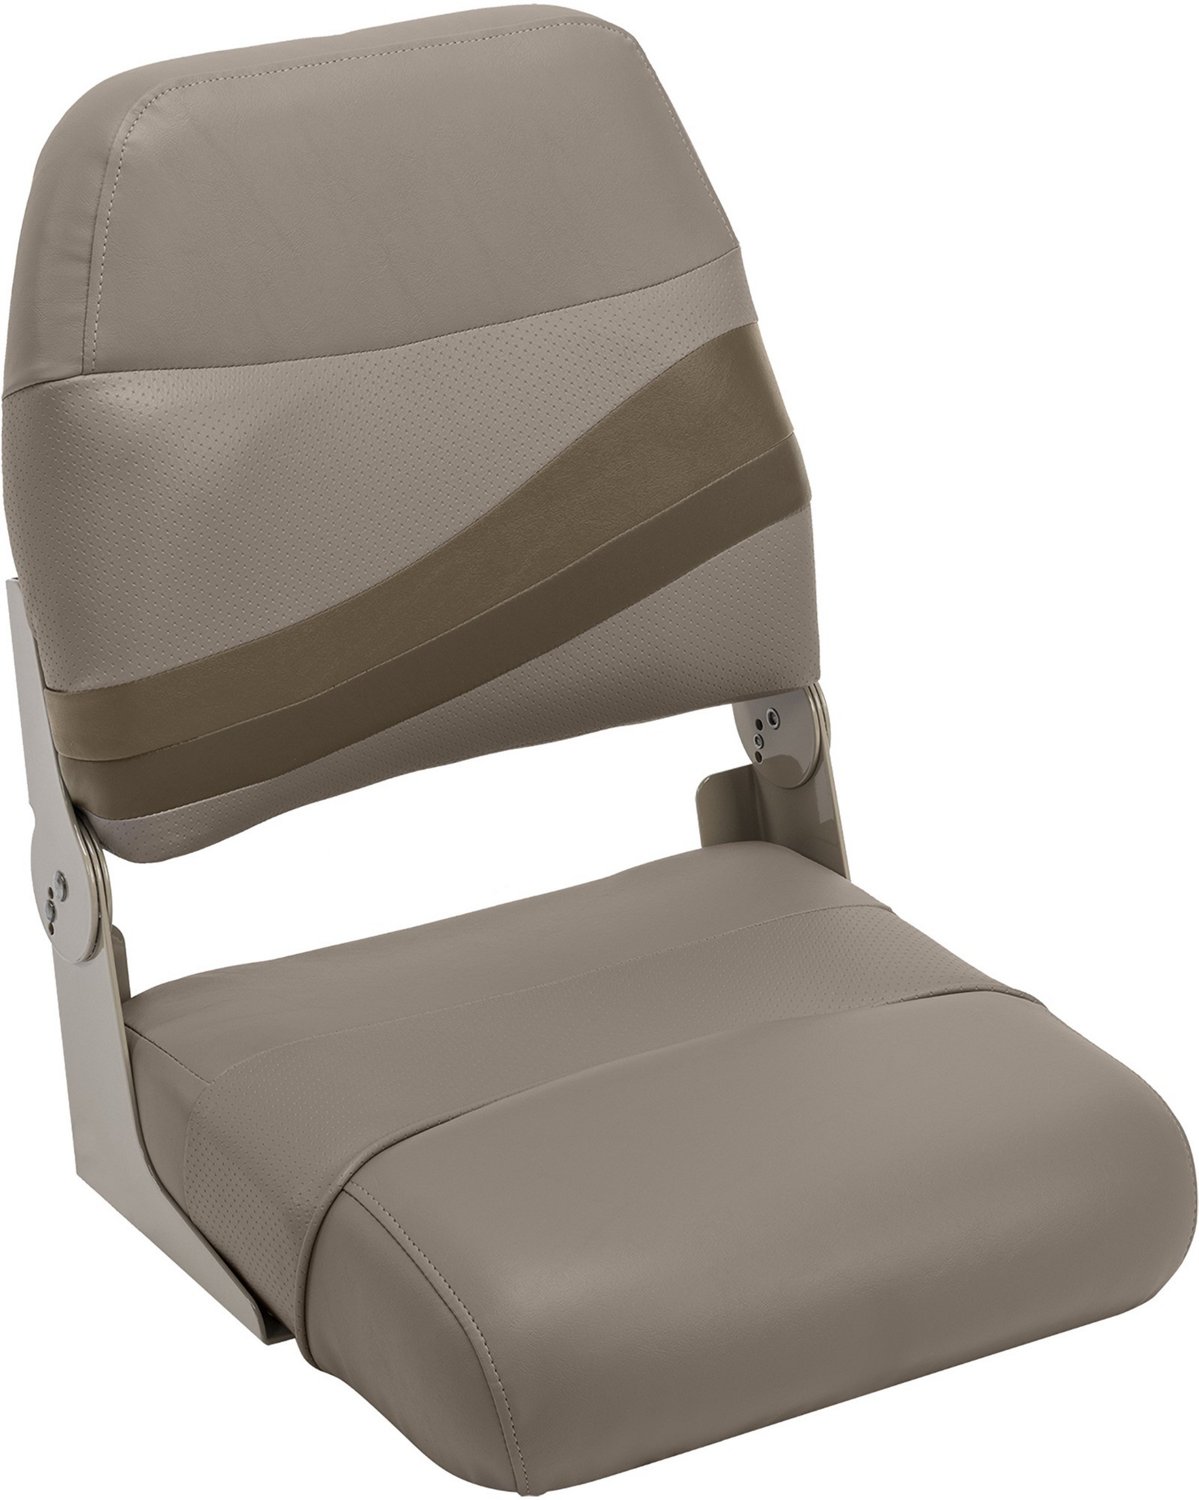 Academy Sports + Outdoors Wise BM1147 Premier Pontoon High Back Fishing  Boat Seat